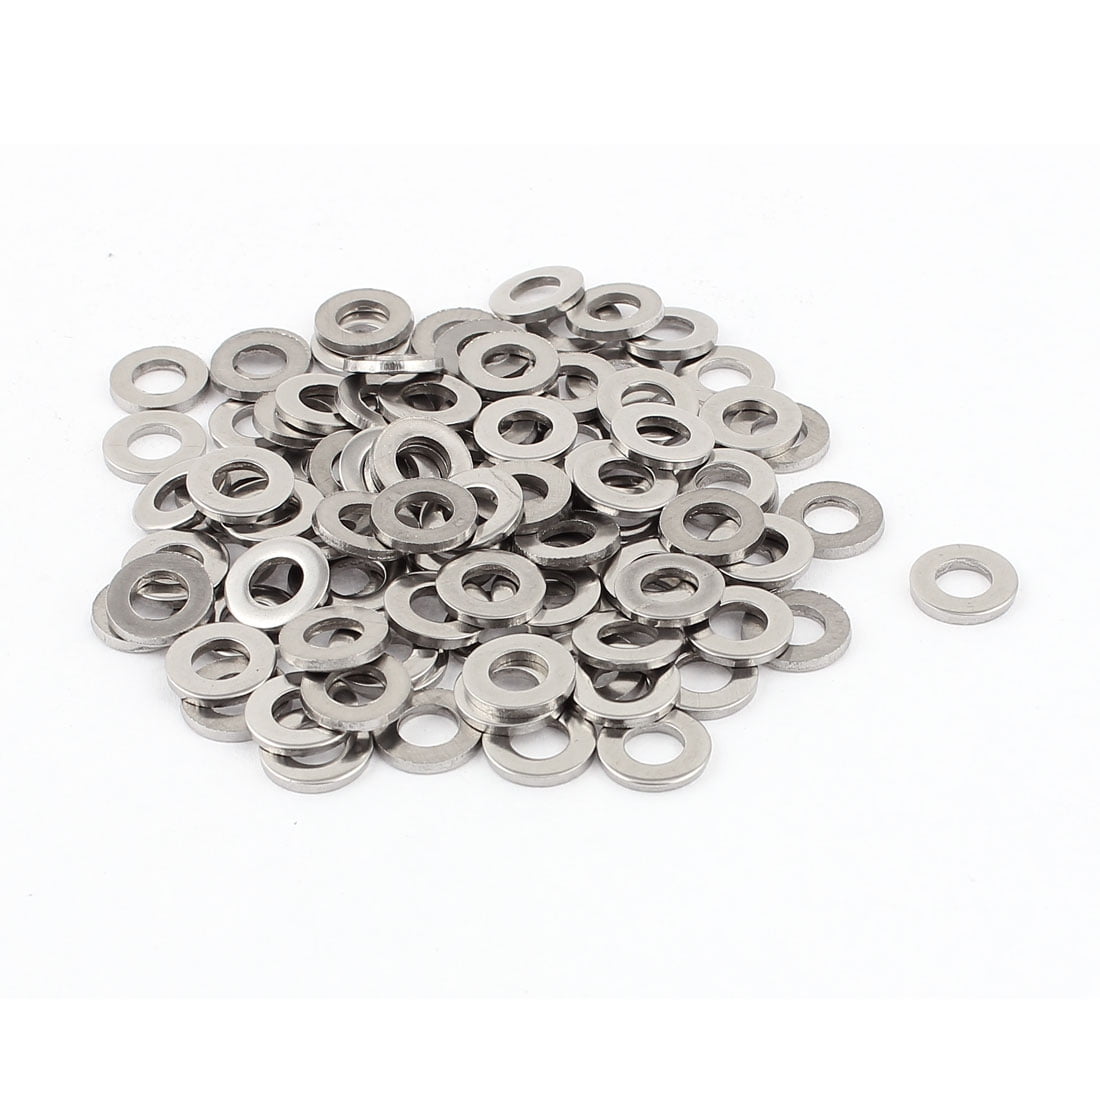 6mm x 12mm x 0.3mm Metal Wavy Wave Crinkle Spring Washers 100pcs